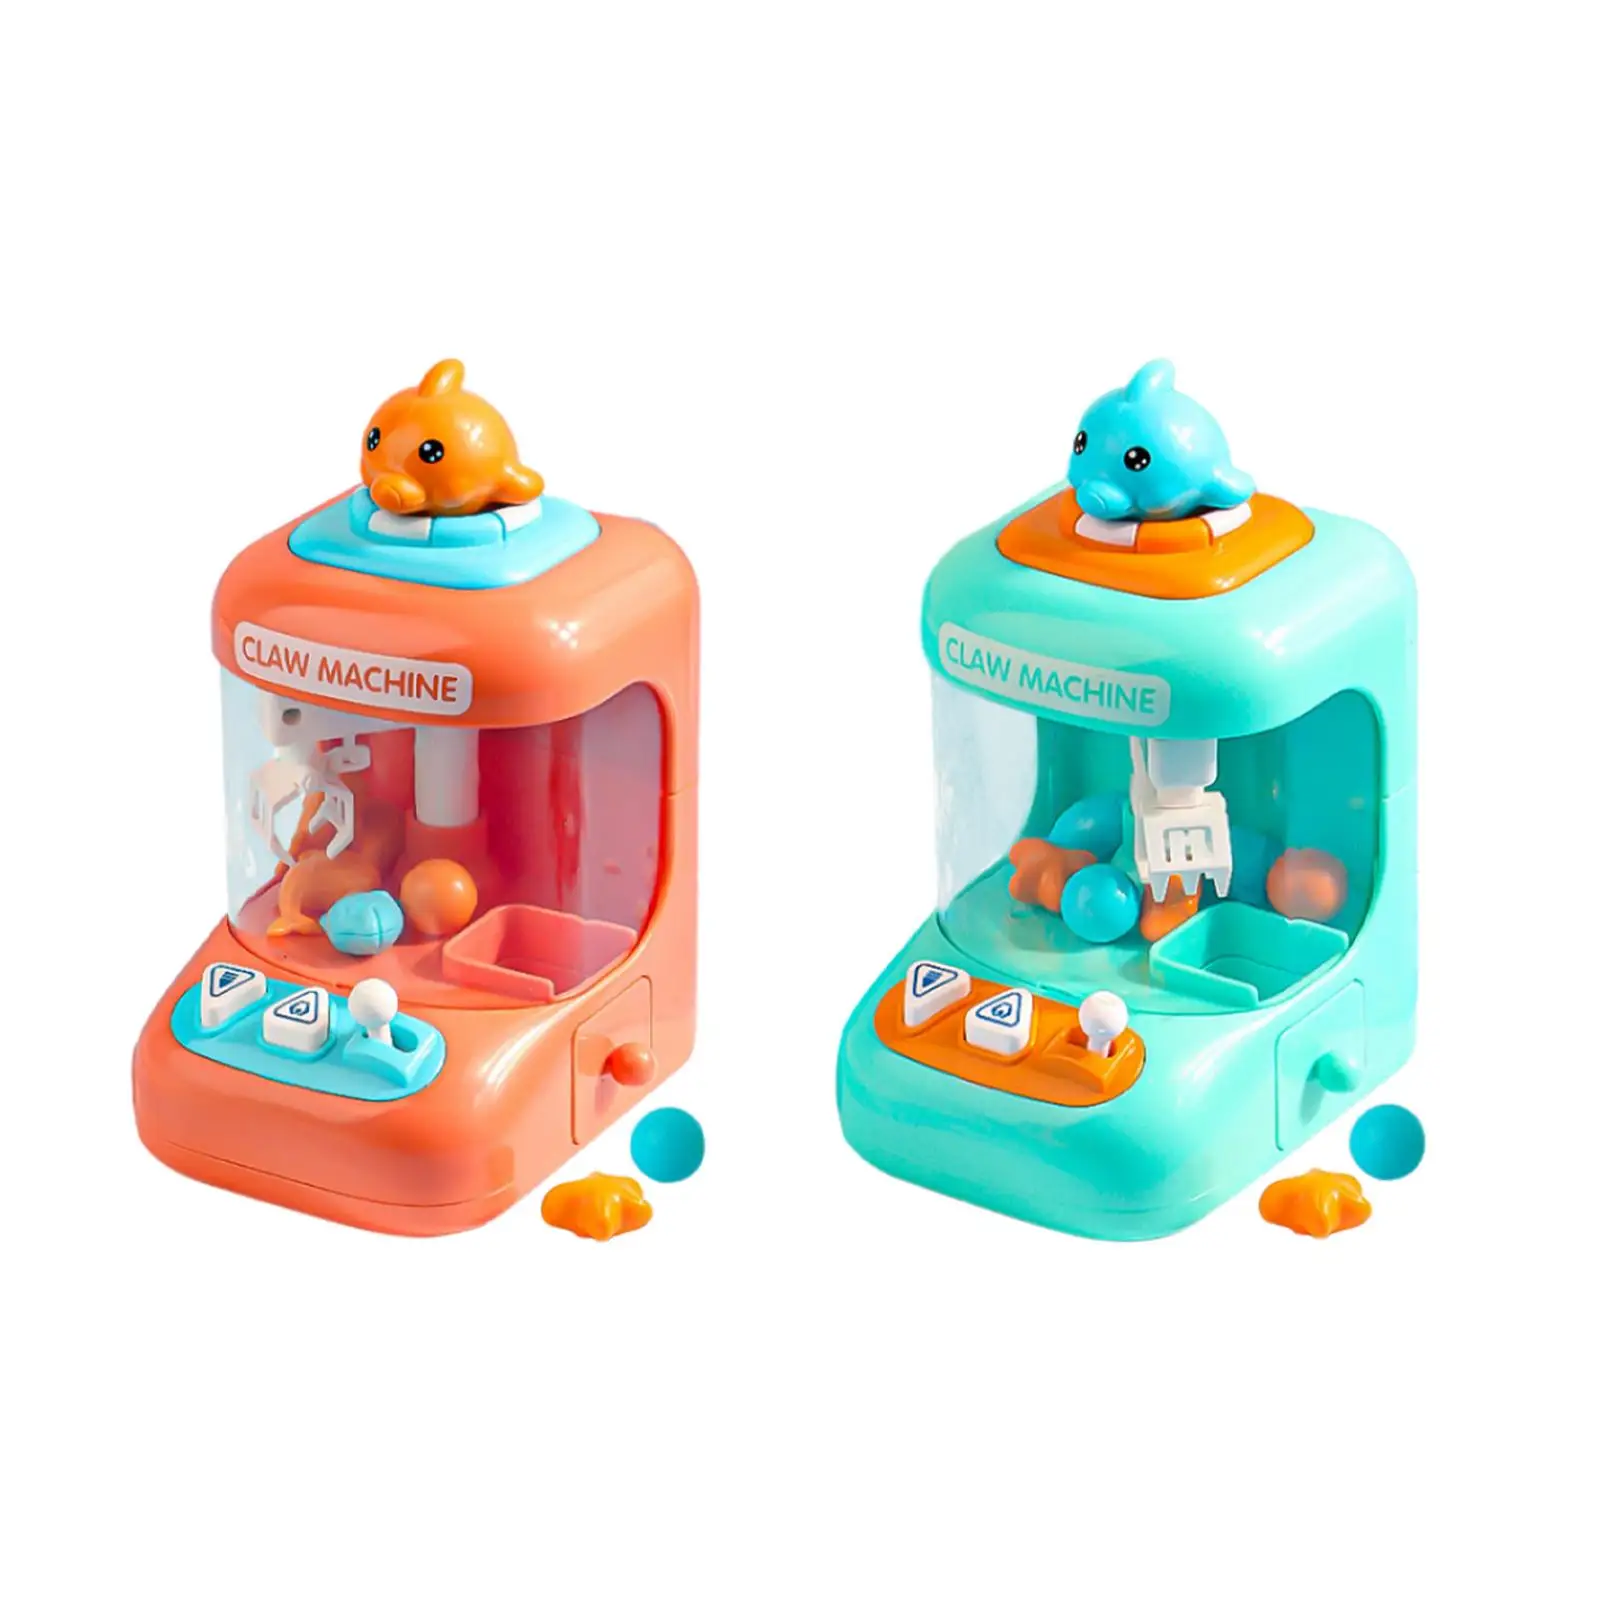 Claw Machine Arcade Toys Toy Grabber Dispenser for Adults Boys Girls Kids